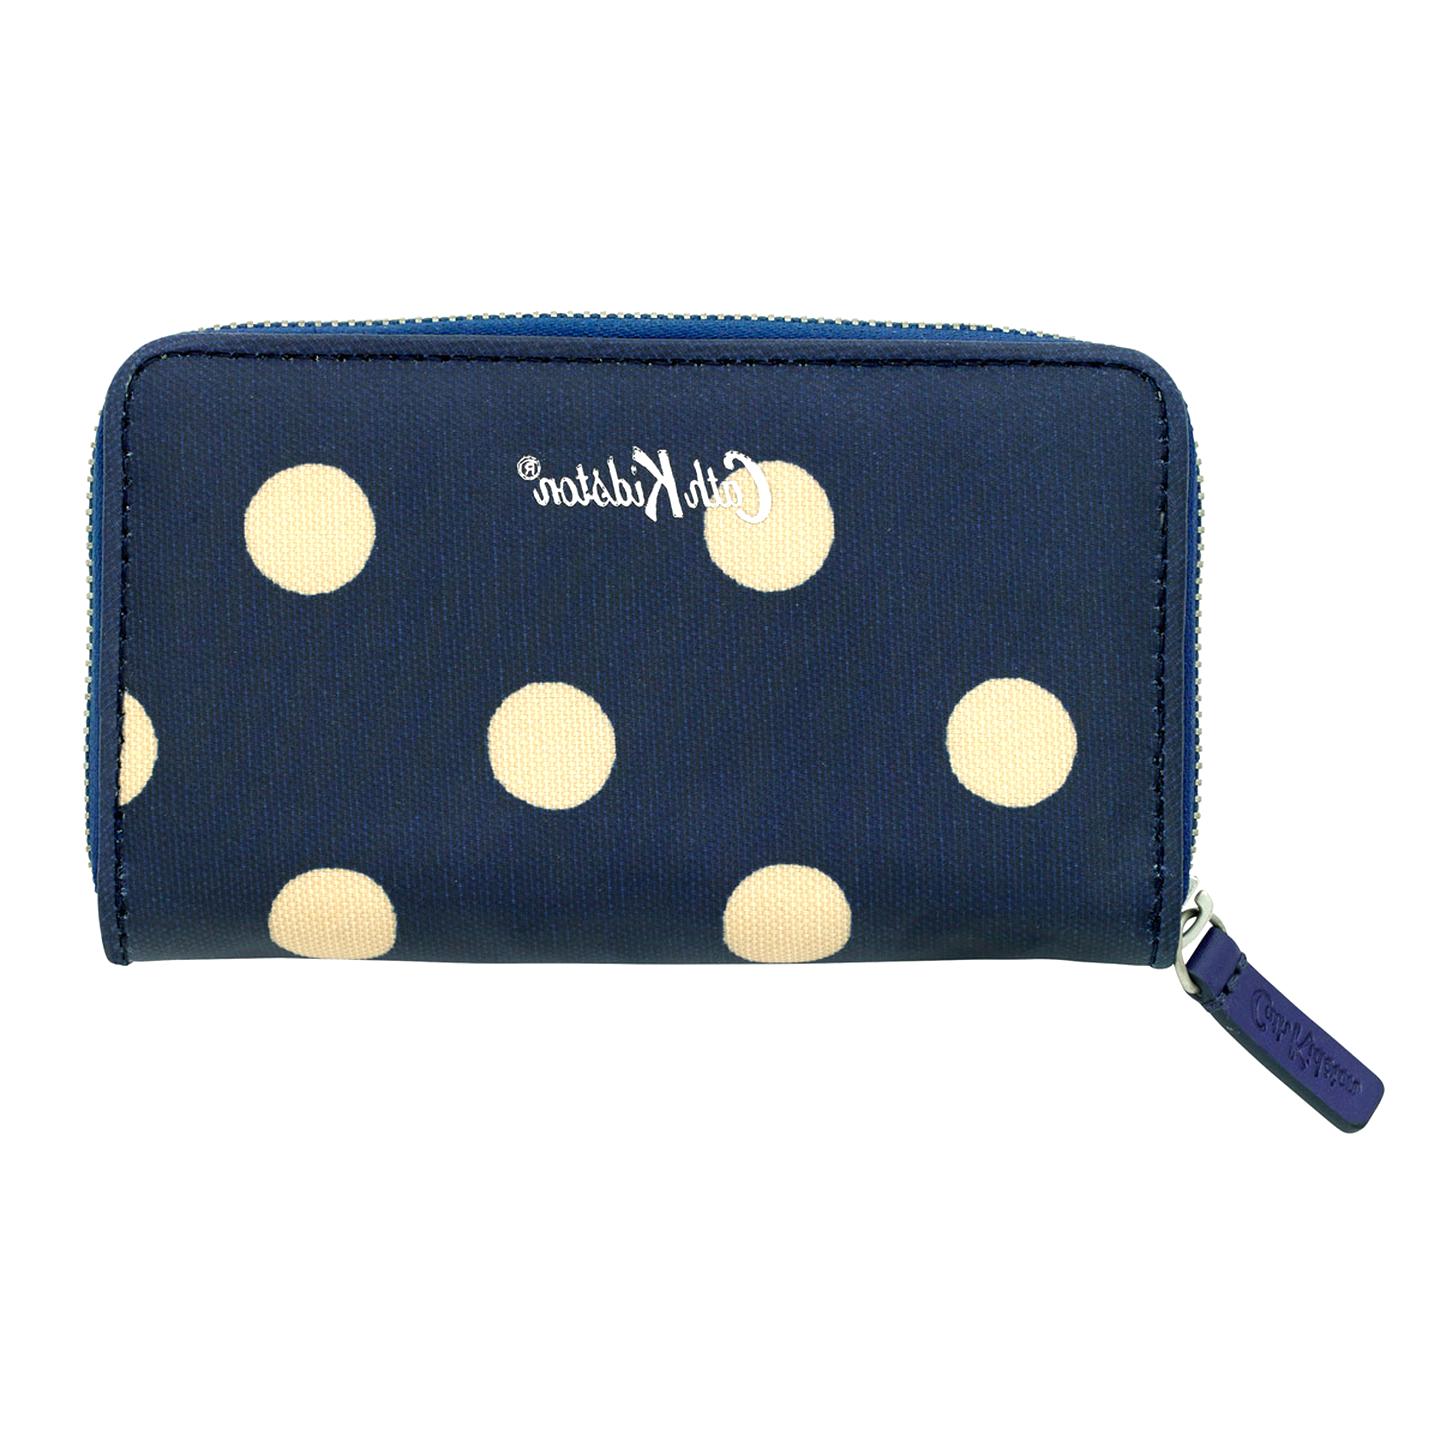 Cath Kidston Wallet for sale in UK | 78 used Cath Kidston Wallets